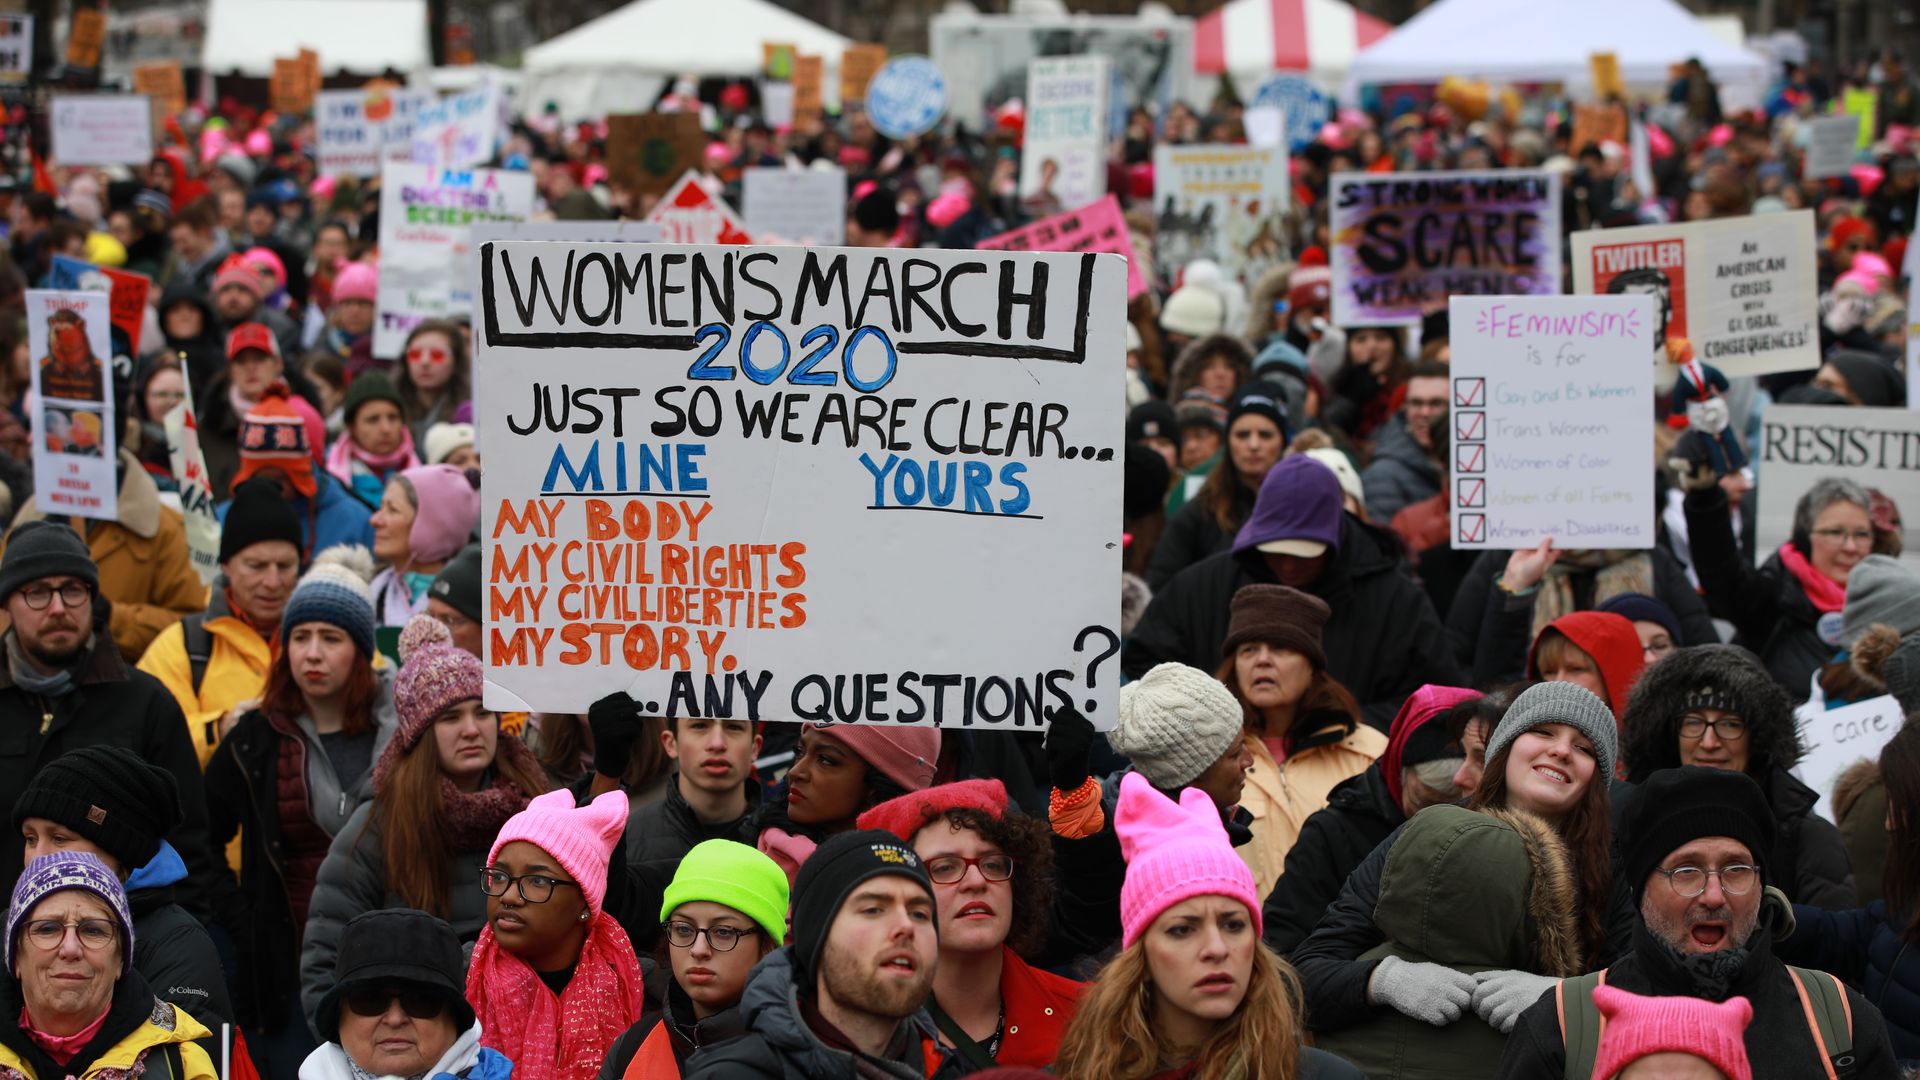 People participate in the Women's March as they protest against the U.S. President Donald Trump in Washington, United States on January 18